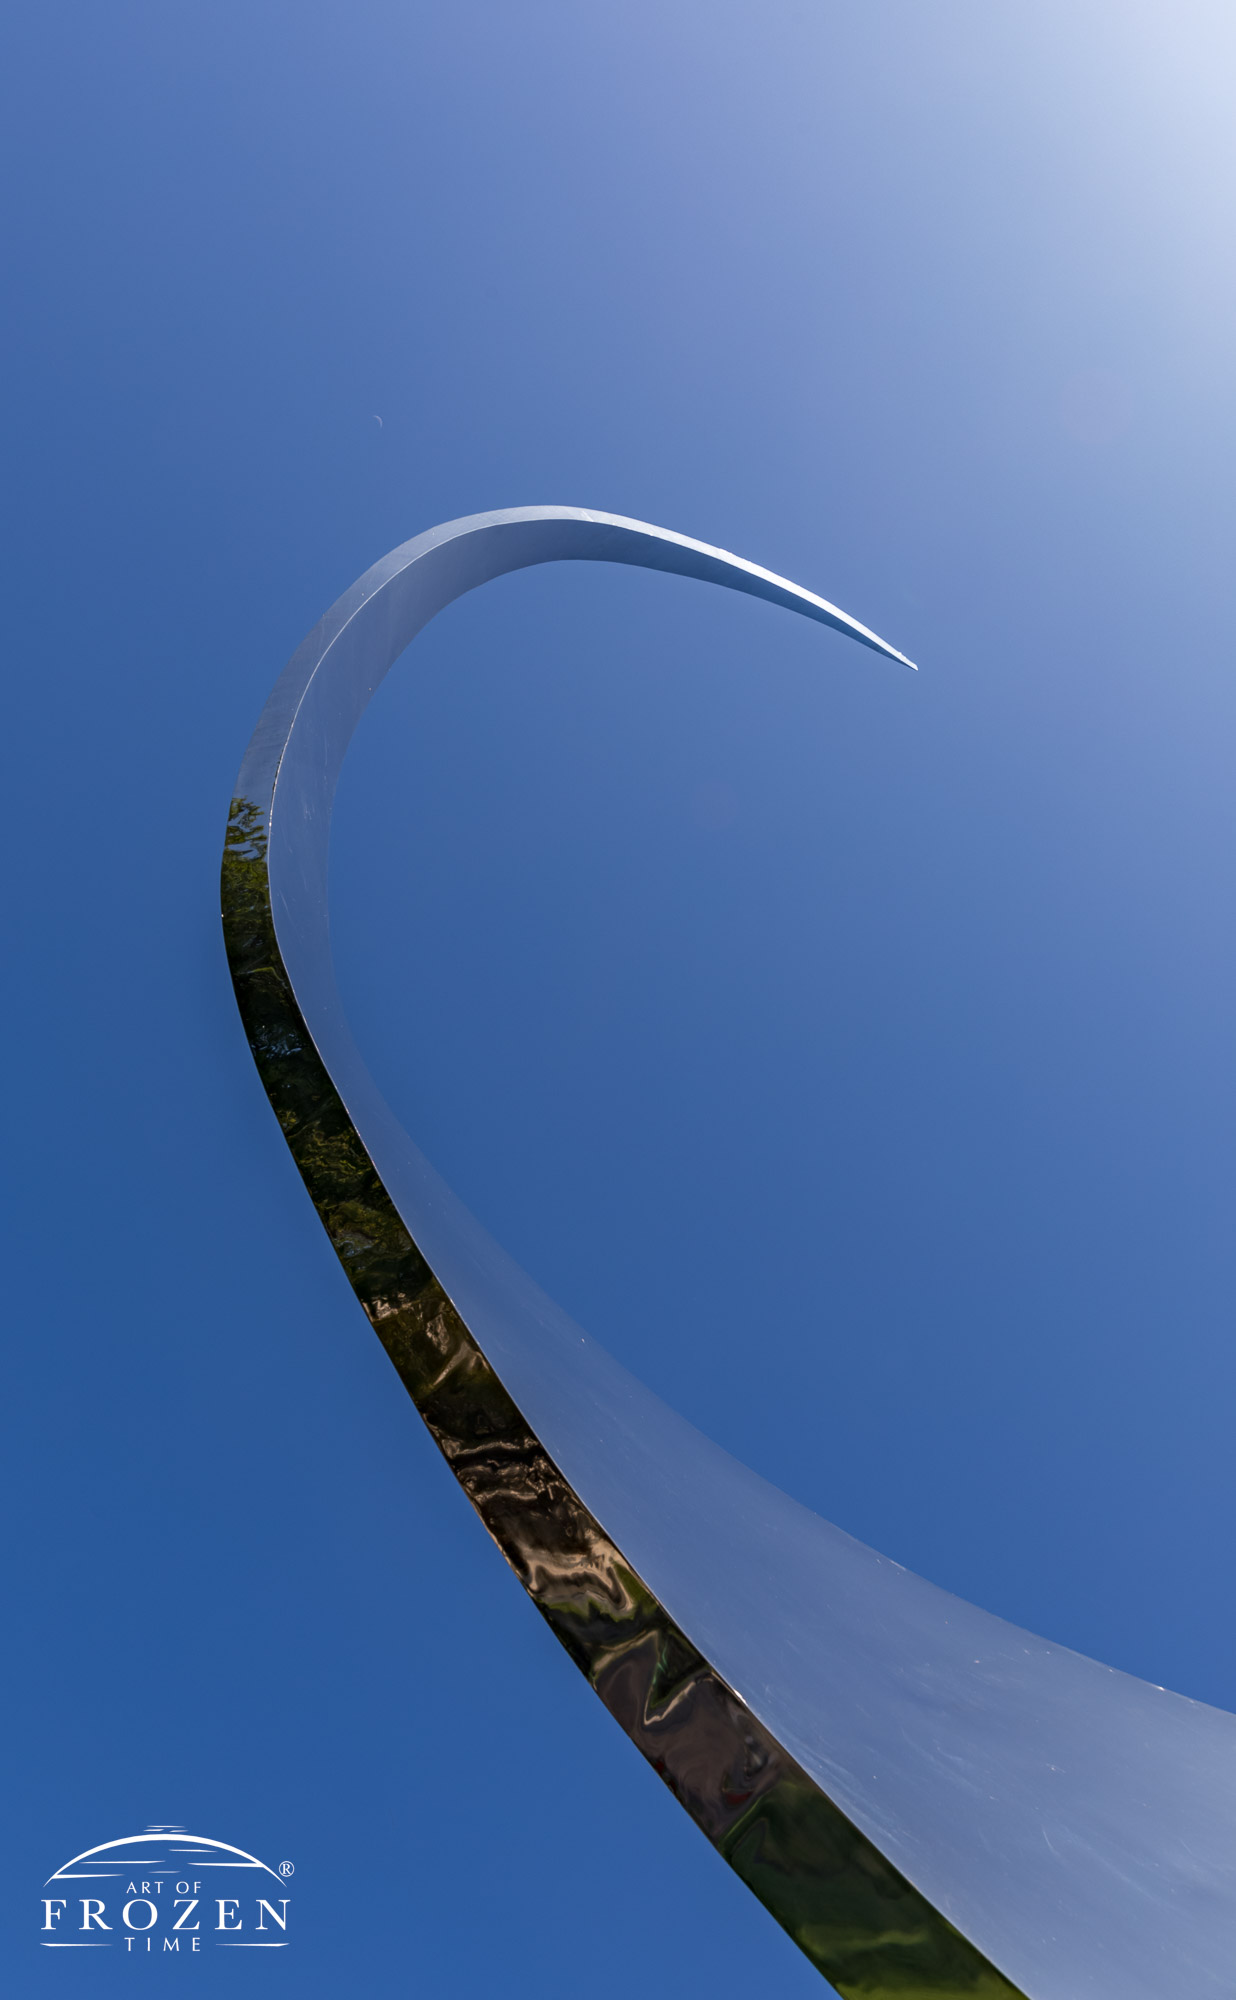 An elegant mirror-finished sculpture that spirals upward into the blue fall sky symbolizing Dayton’s role in man’s journey to space